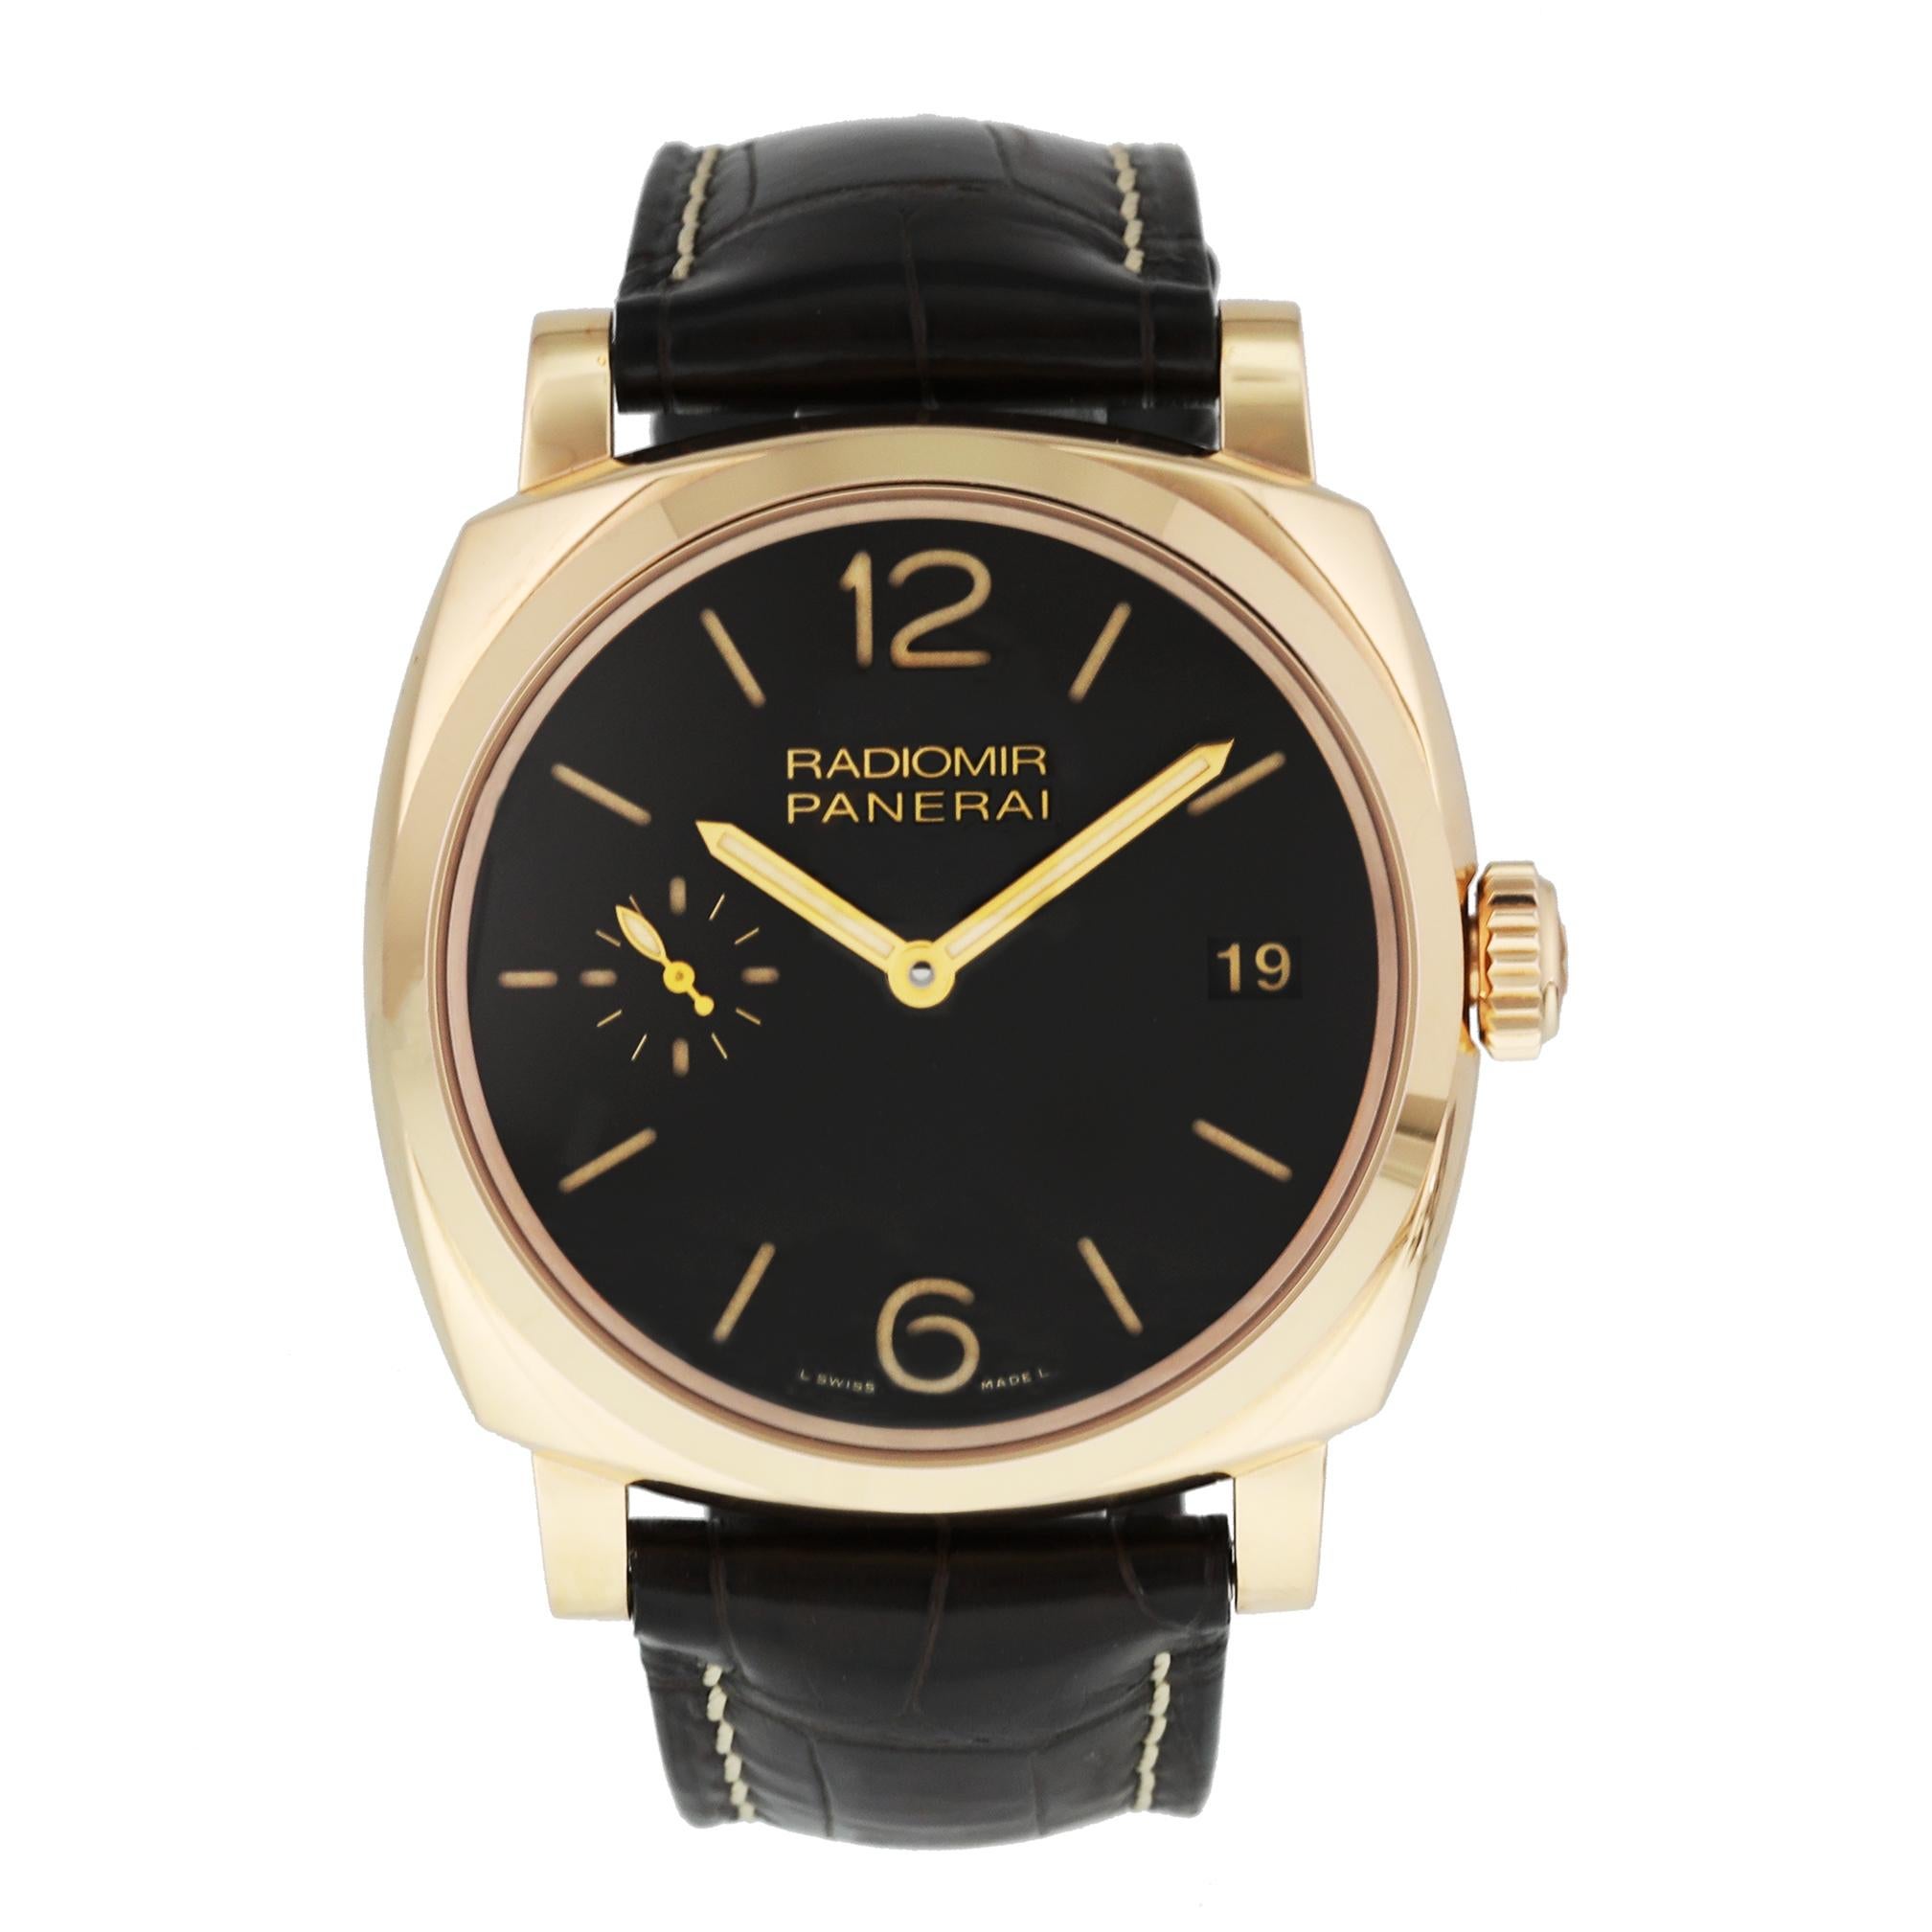 Panerai Radiomir 1940 PAM515 3 Days Oro Rosso Men's Watch Box and Papers In Excellent Condition For Sale In New York, NY